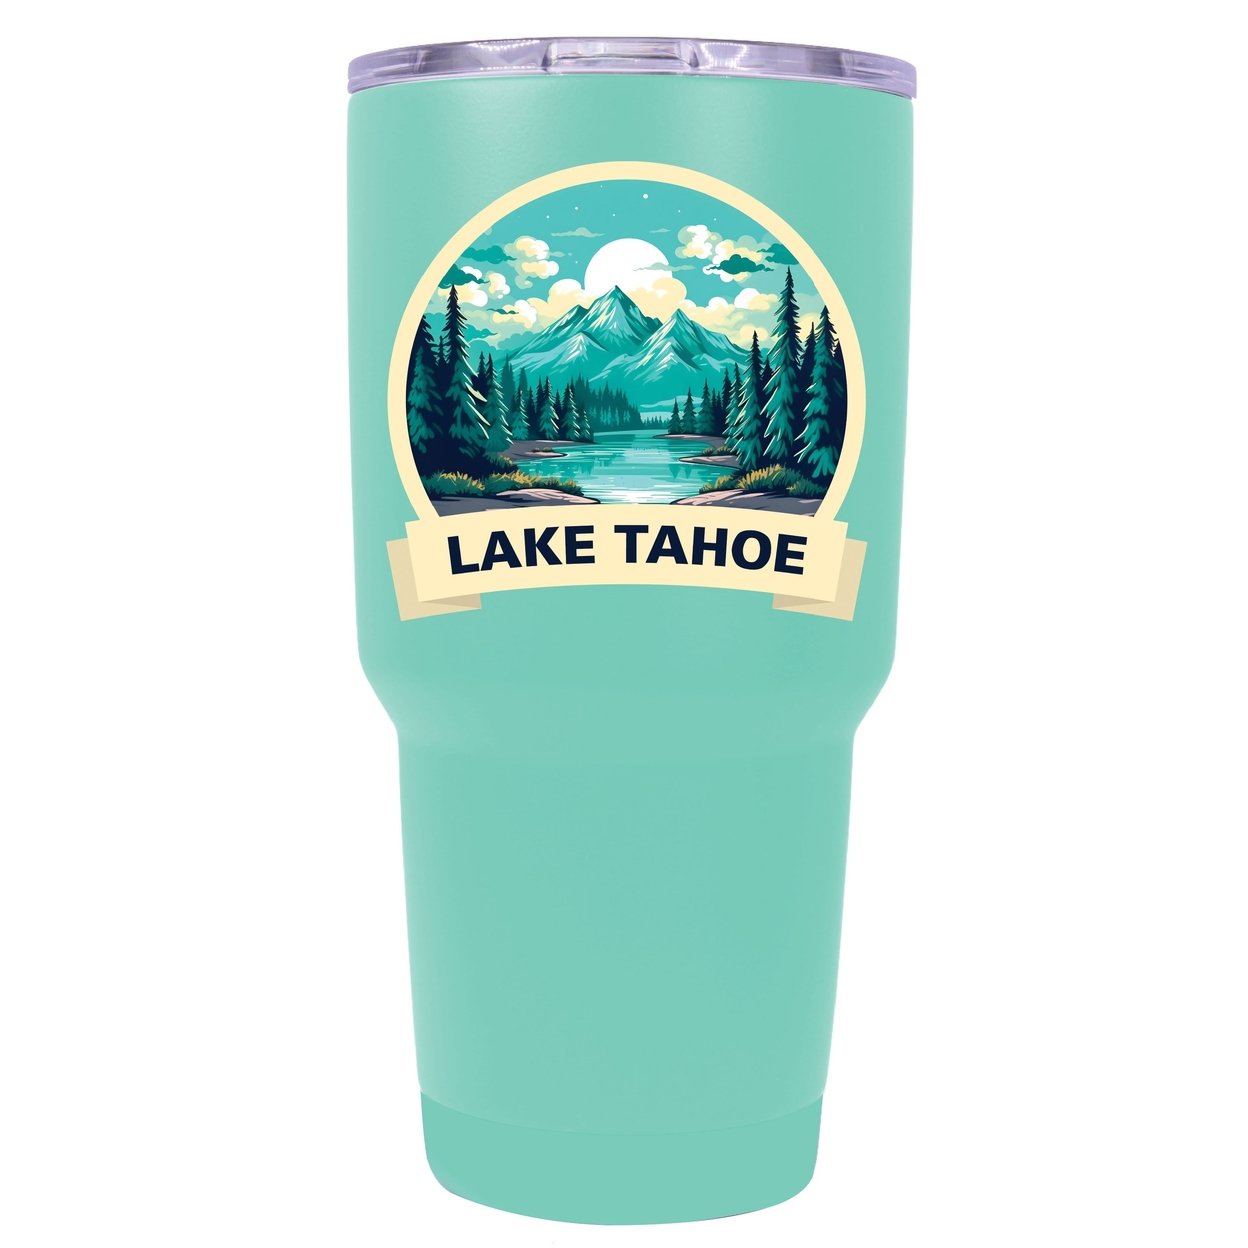 Lake Tahoe California Souvenir 24 Oz Insulated Stainless Steel Tumbler - Coral,,4-Pack